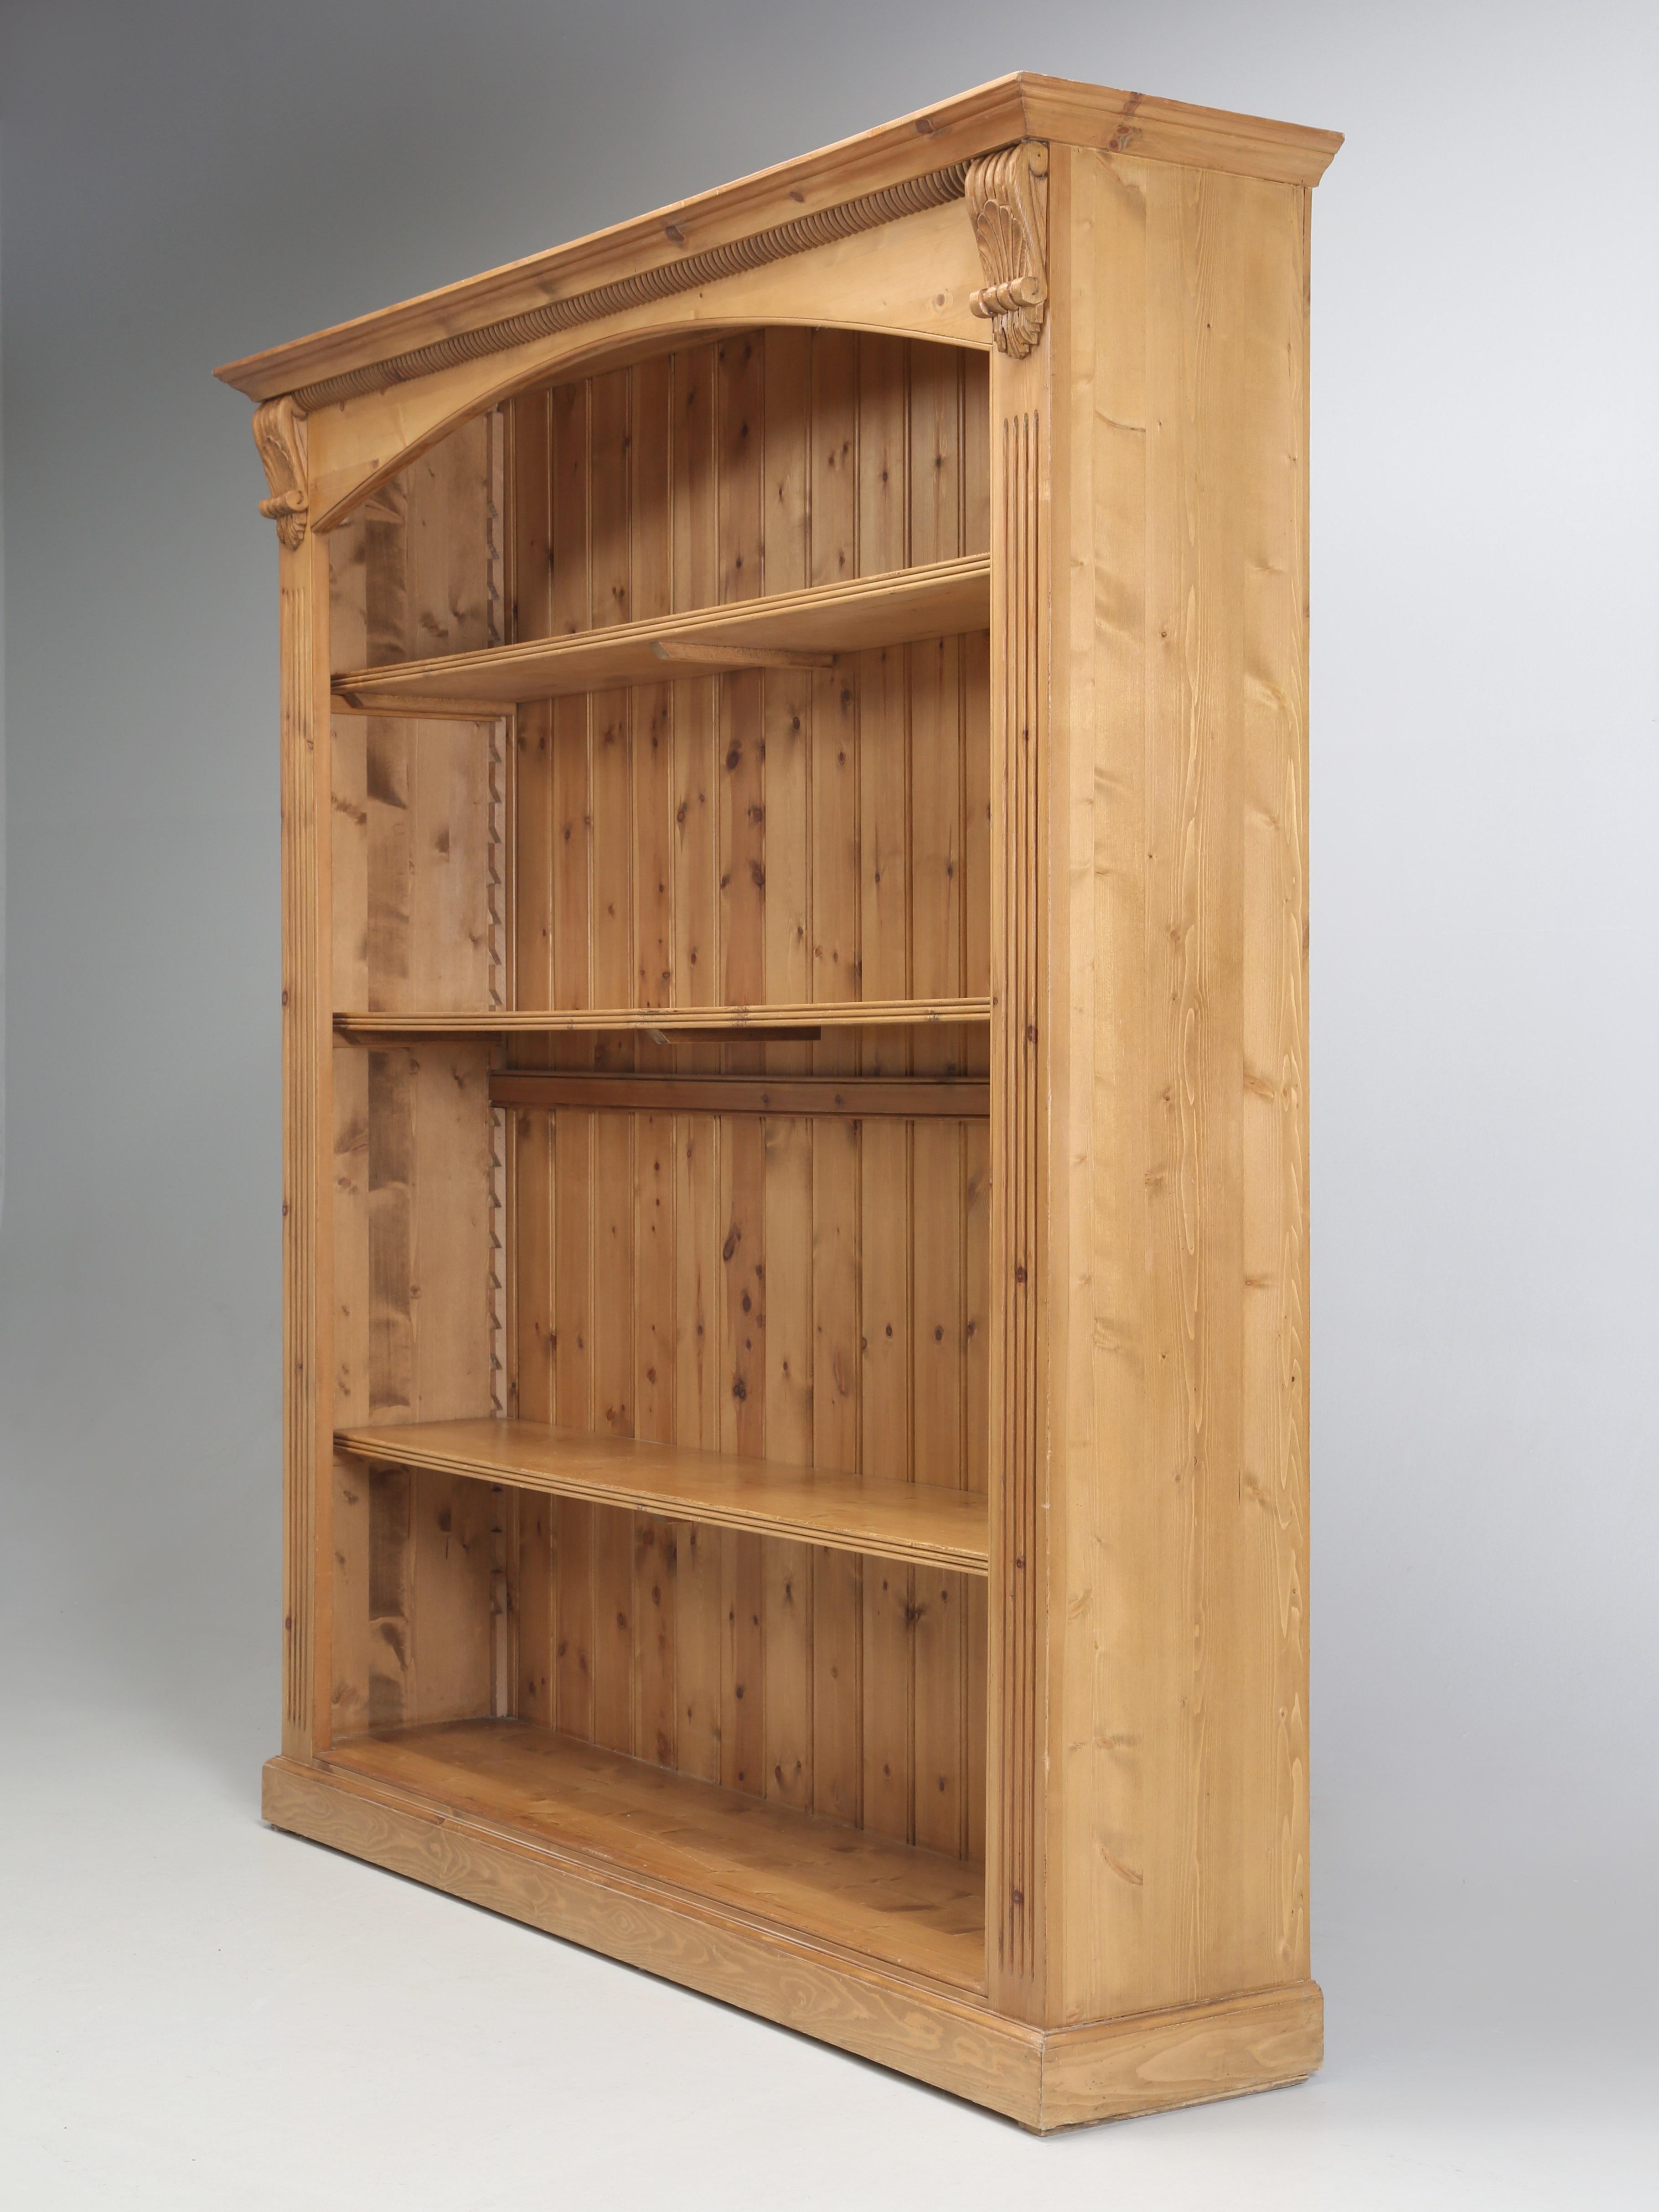 English Pine Open Front Bookcase in a traditional beeswax finish that was made in the town of Hull a port city in the Yorkshire region of England. Quite a while ago, there was company called Chrispyn English Pine who produced beautiful English